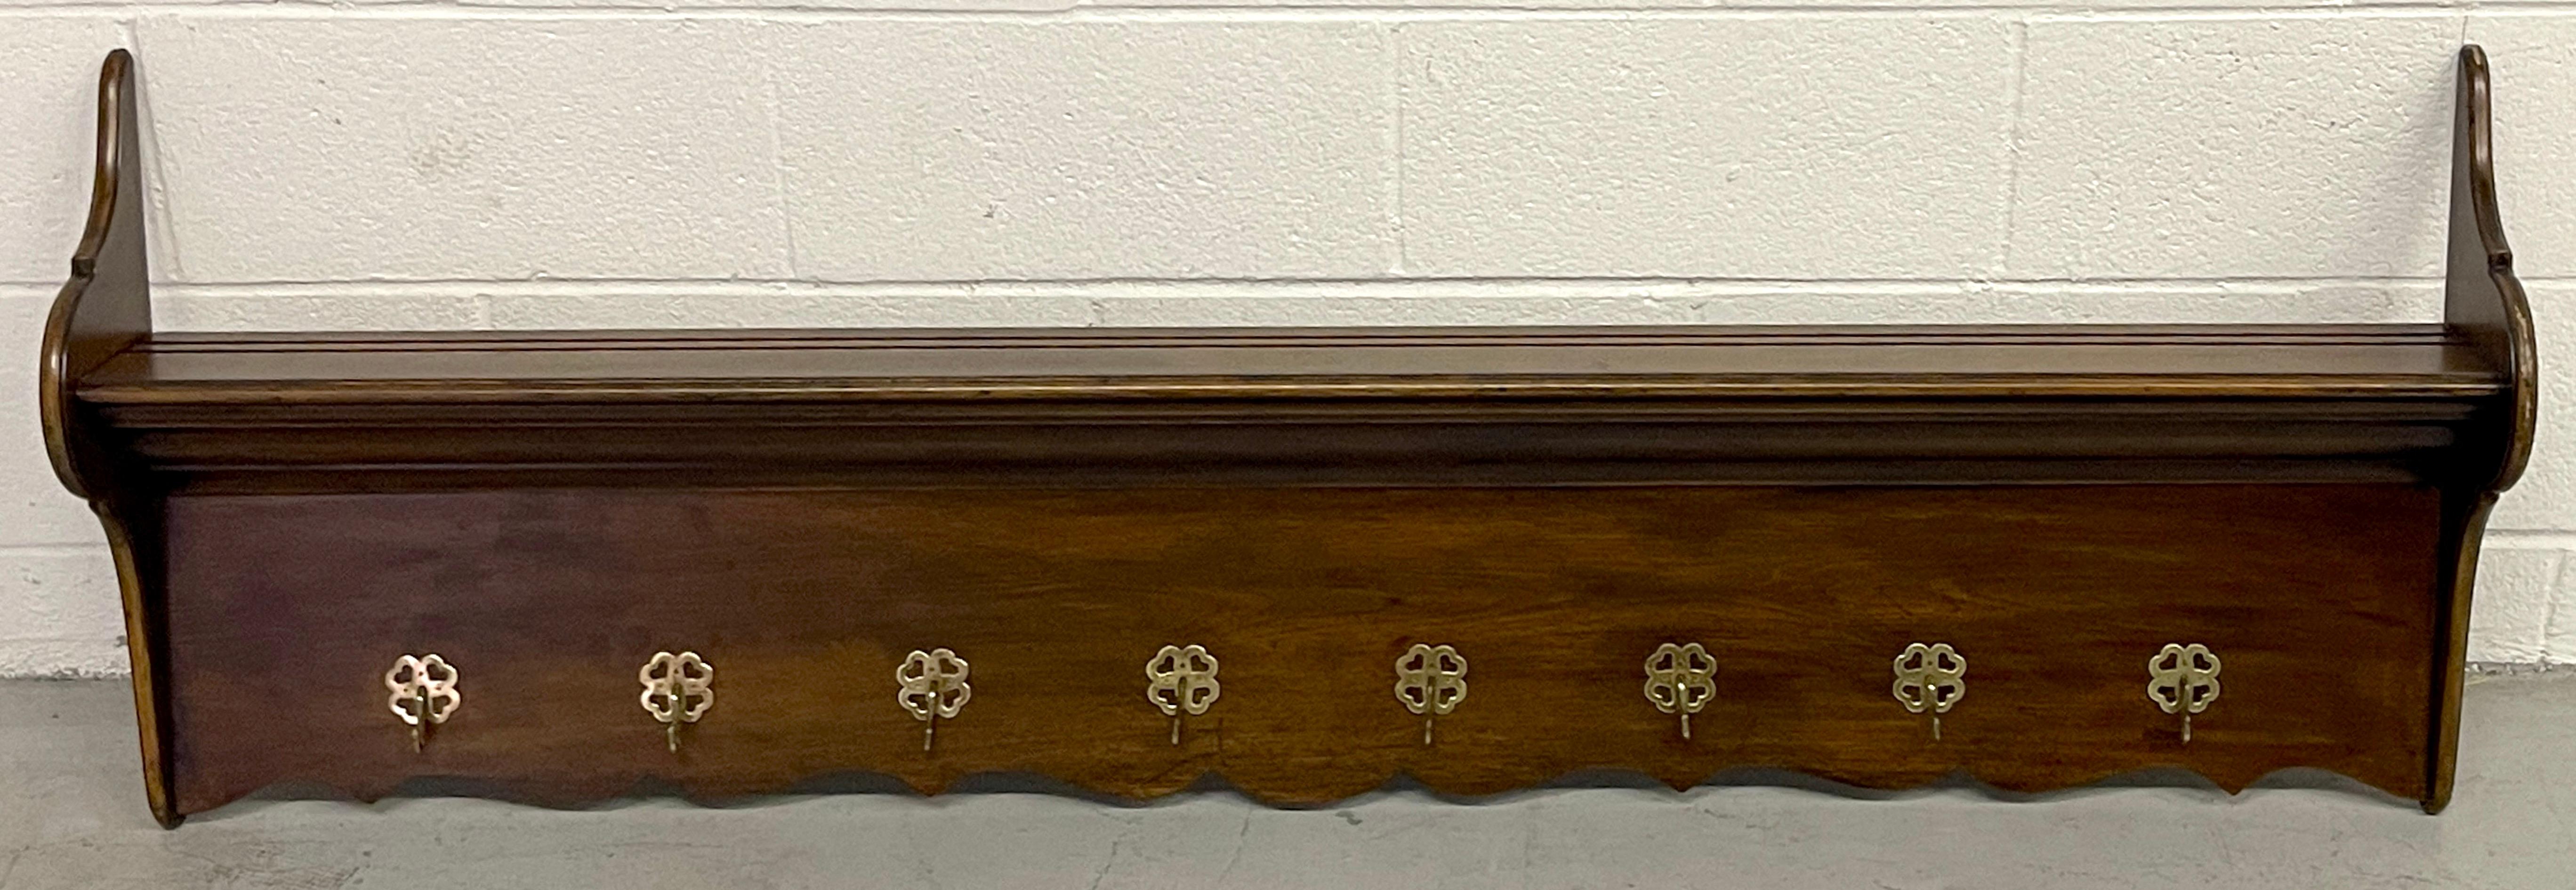 Antique Irish Mahogany & Brass Hanging Coat /Plate Rack or Kitchen Rack 
Circa 1910

Of typical form, Two cabriole end caps supporting a rectangular shelf with two plate grooves one at 1.75 and 2.75 inches deep, the lower scalloped frieze fitted